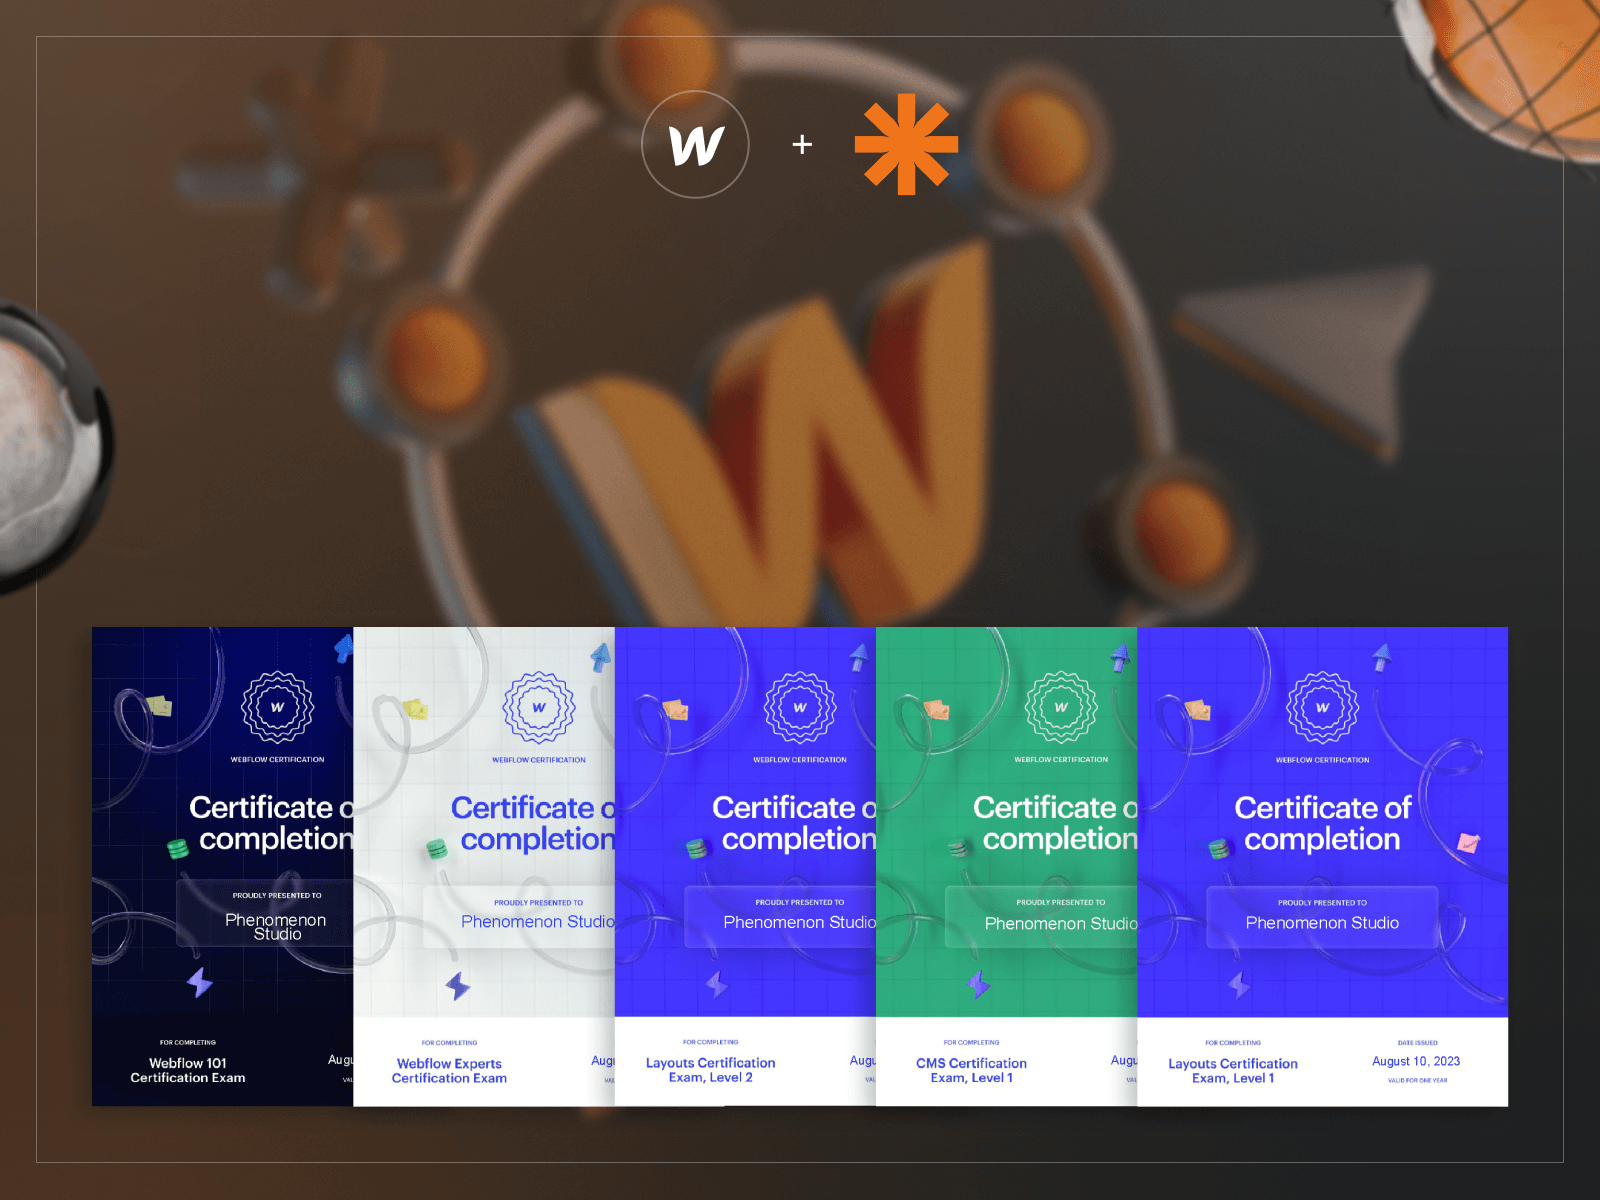 Phenomenon has received newly released Webflow certificates - Photo 